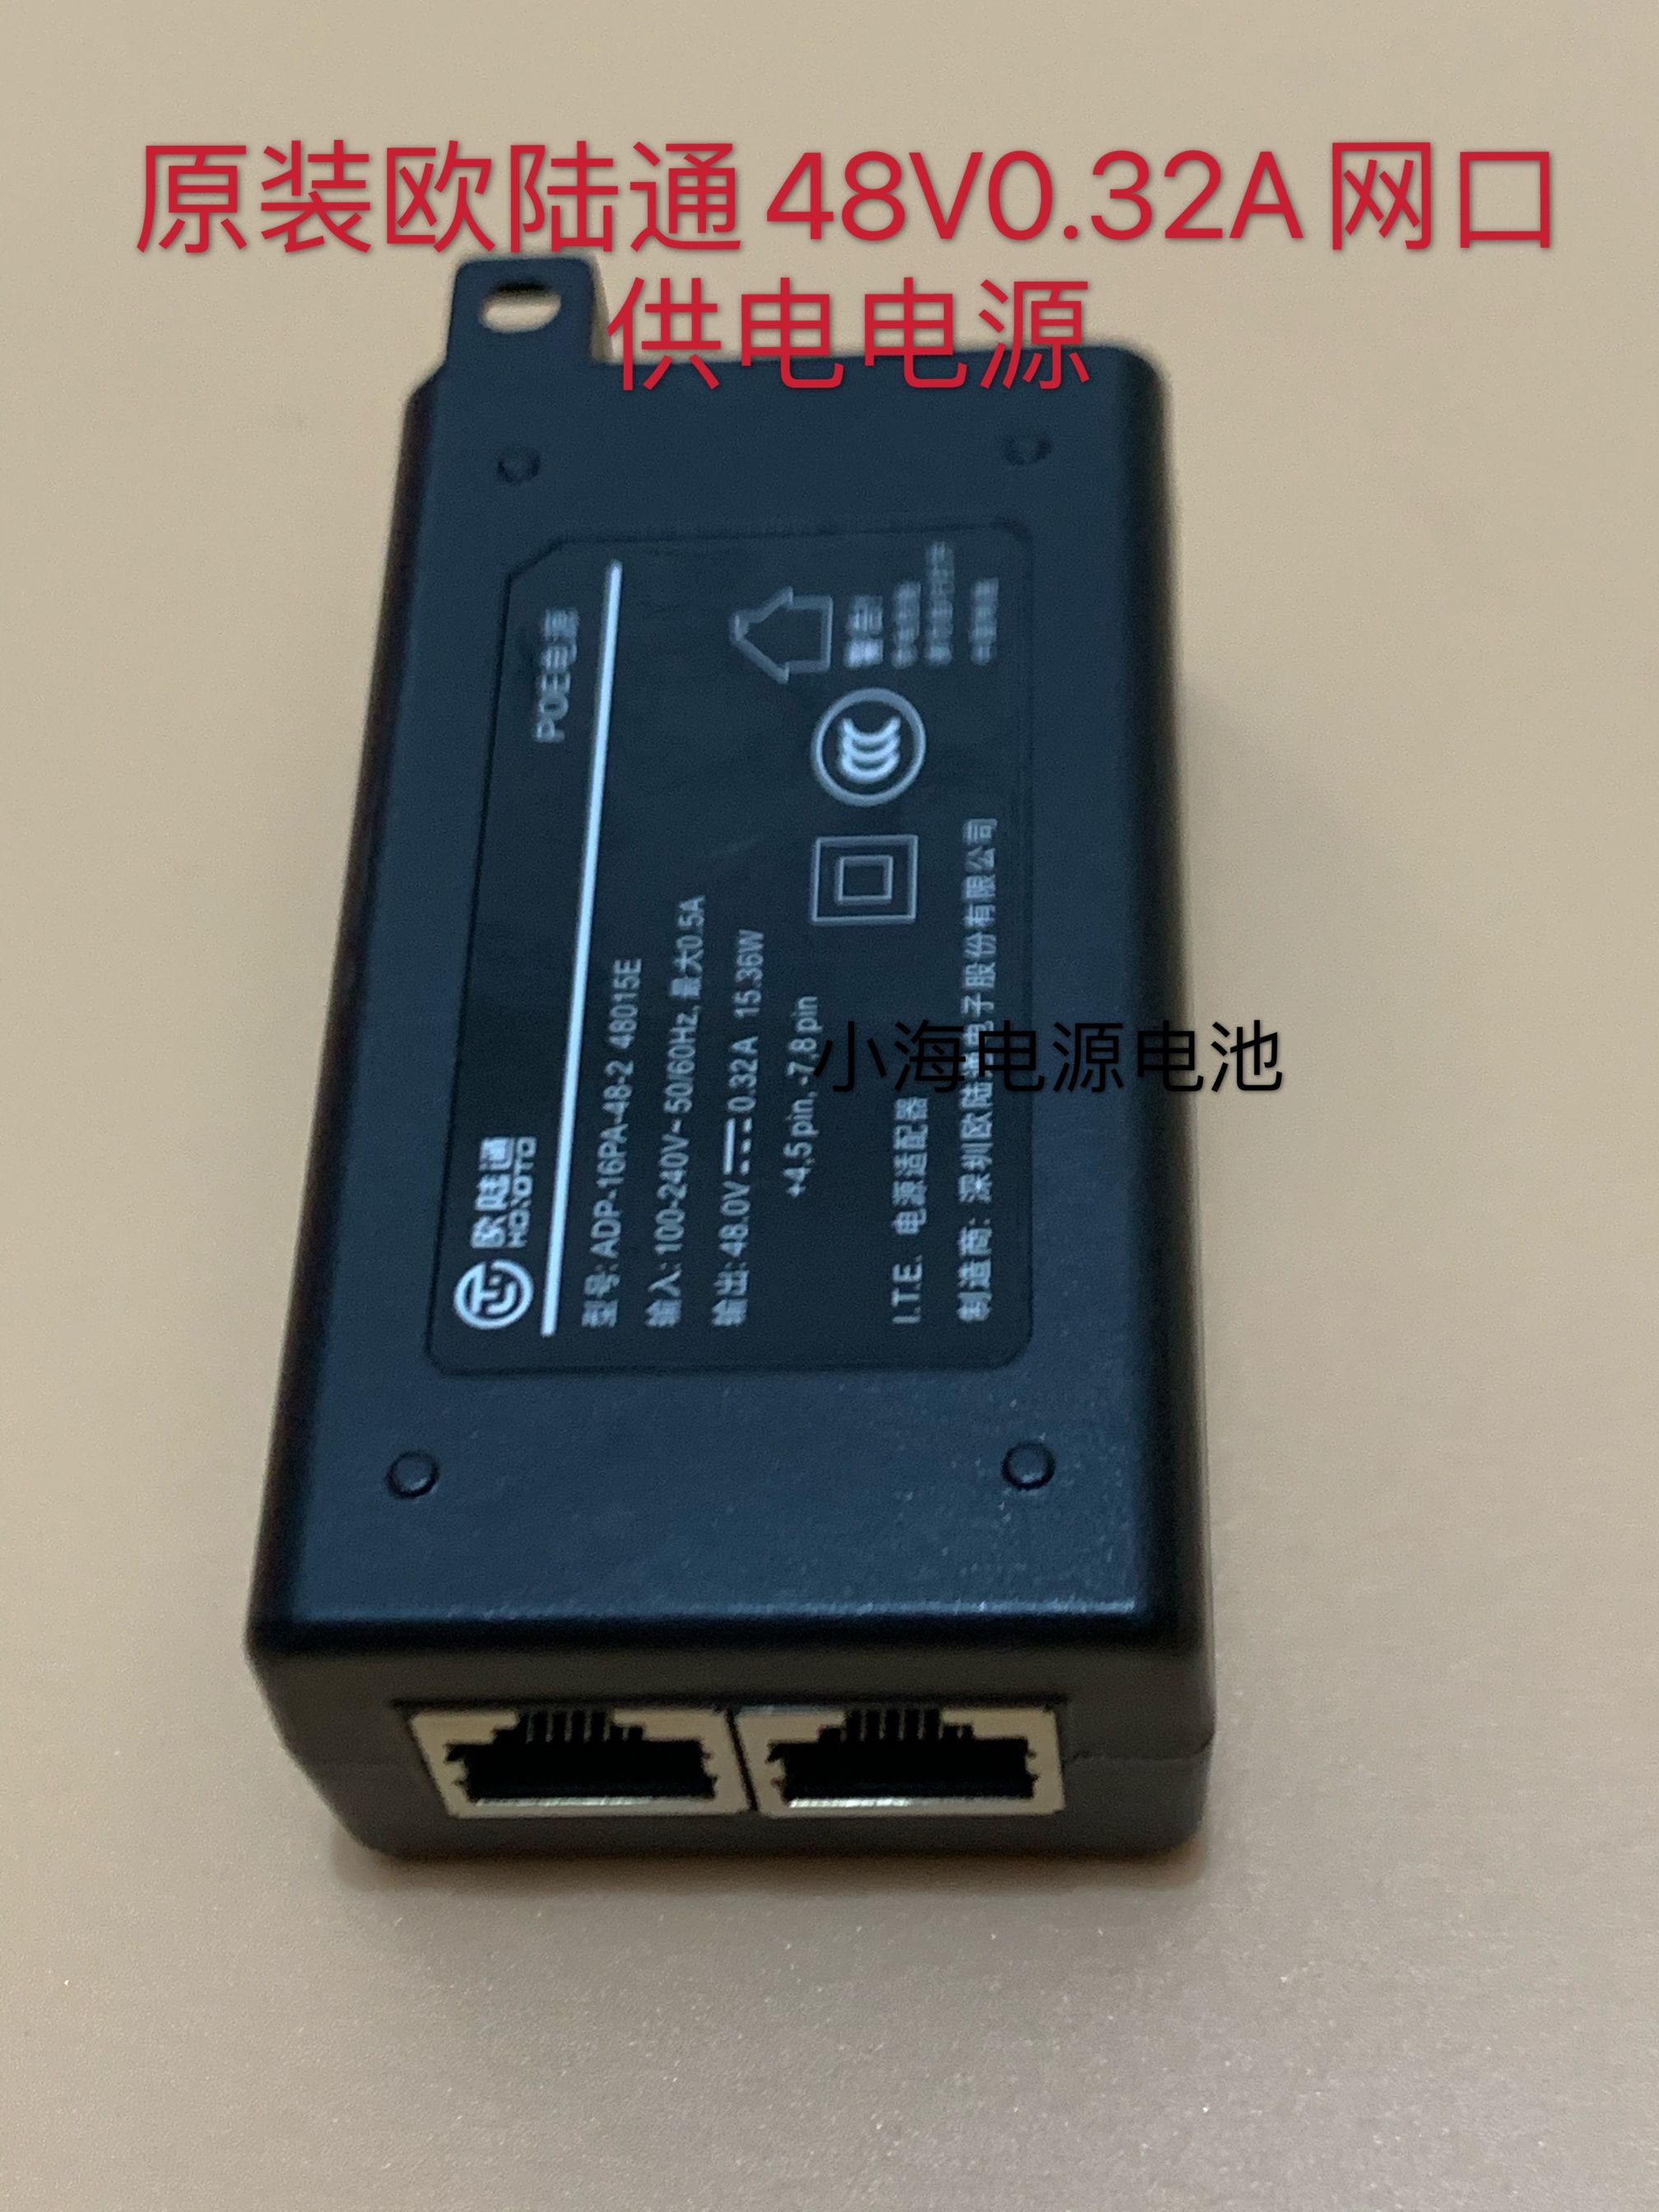 Haikang surveillance camera POE transformer module 48V charger Eurotun 48V0.32A power adapter Product Specifications: P - Click Image to Close